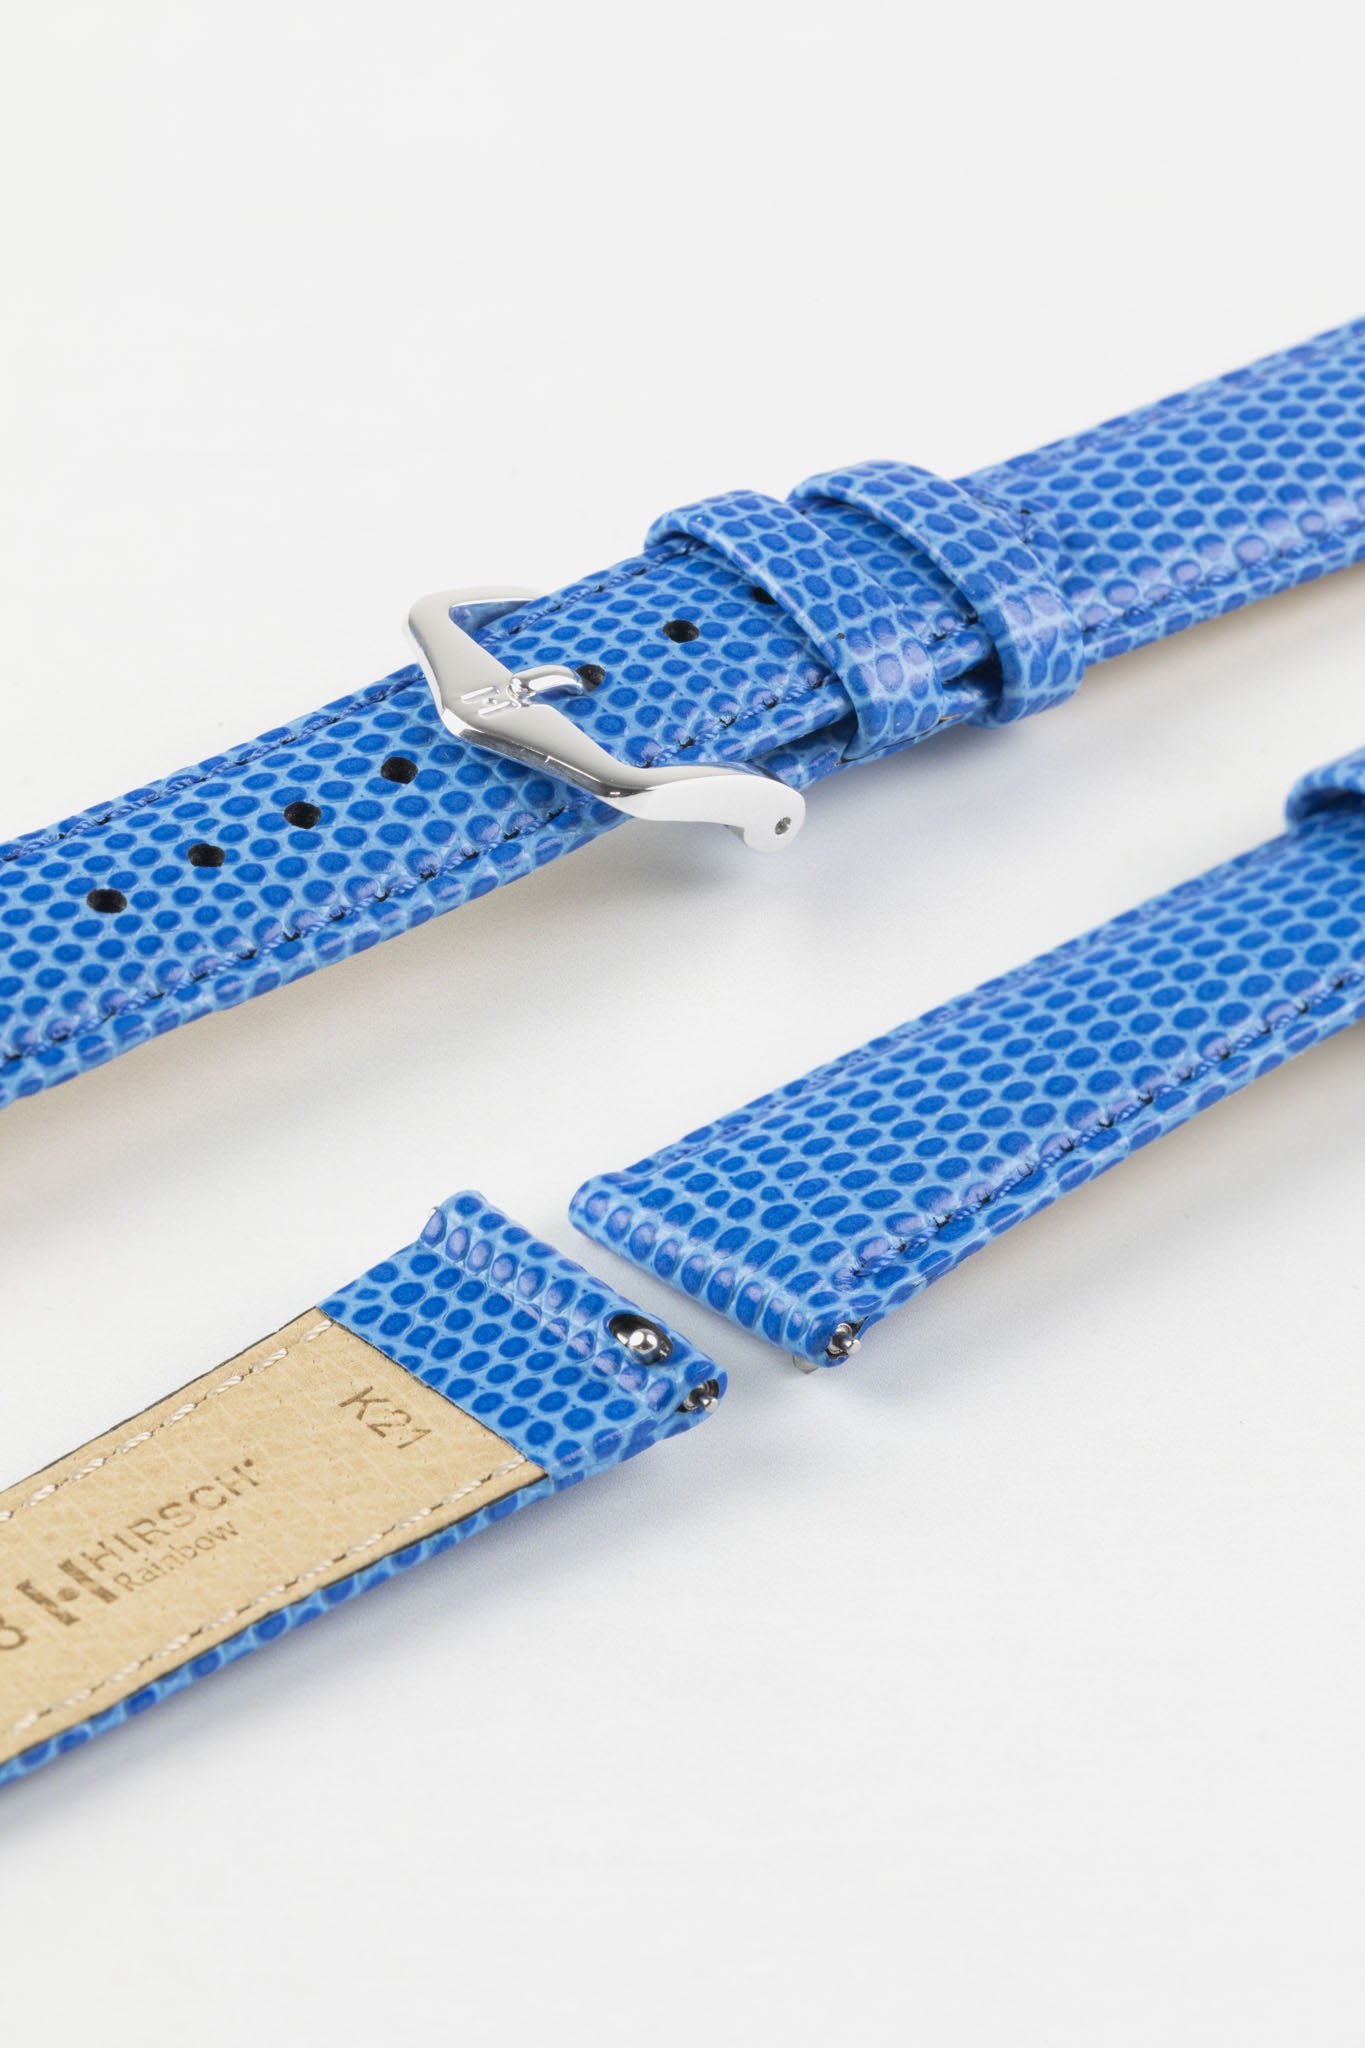 Hirsch RAINBOW Lizard Embossed Leather Watch Strap in ROYAL BLUE